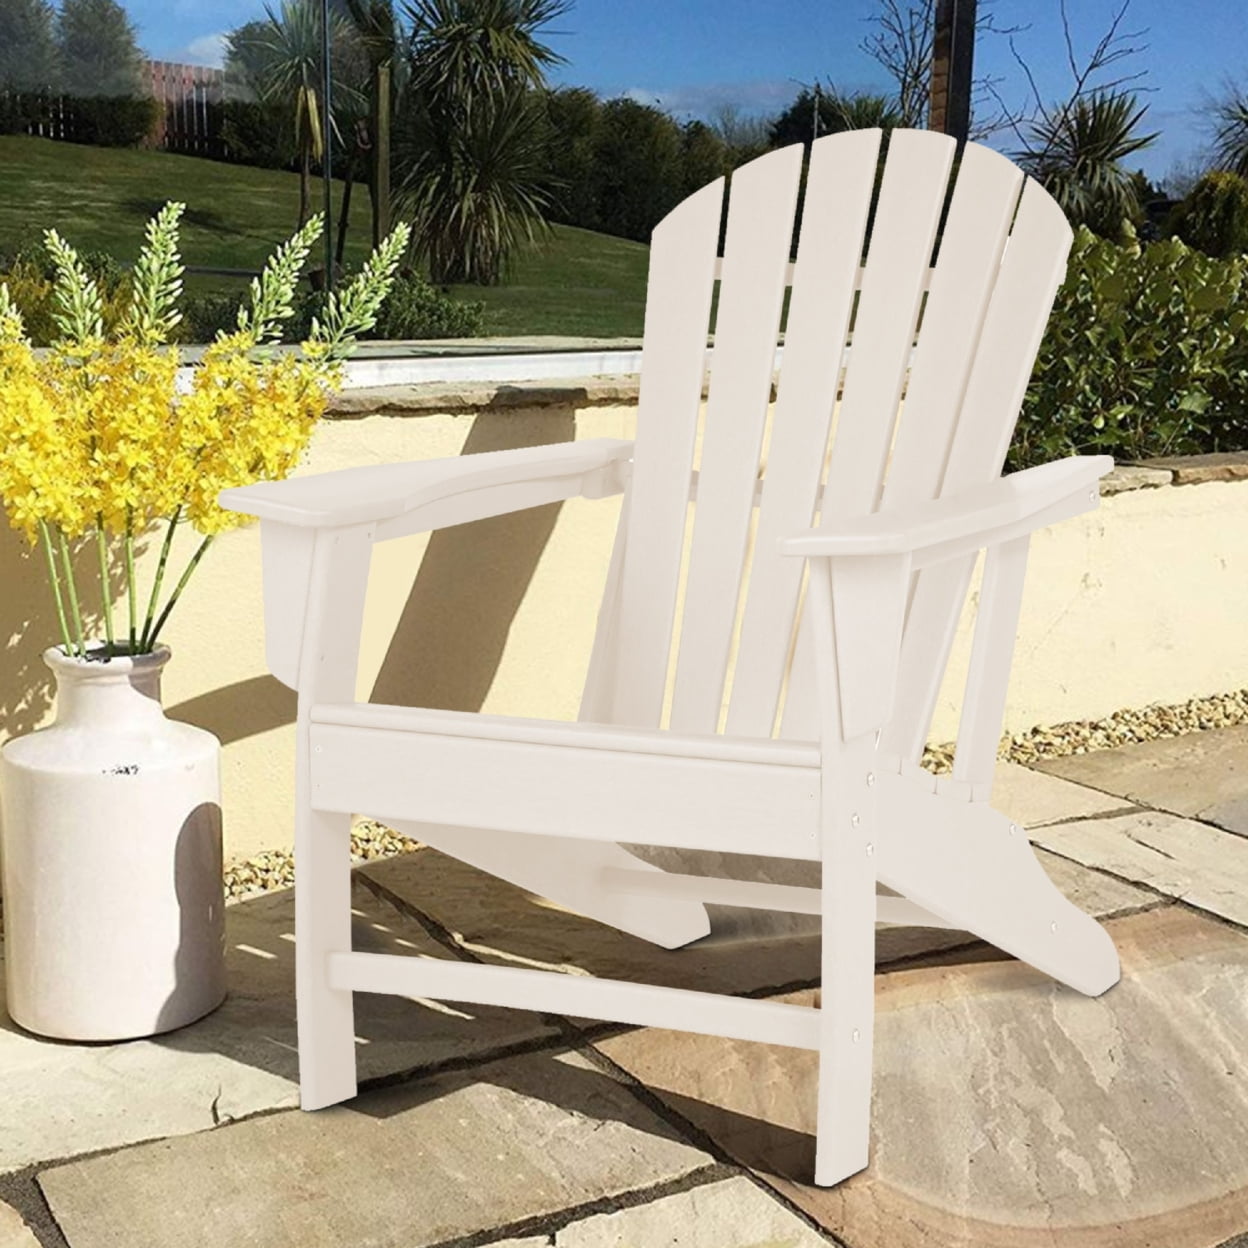 Picture of Benjara BM209700 37.75 x 31.25 x 33.25 in. Contemporary Plastic Adirondack Chair with Slatted Back, White